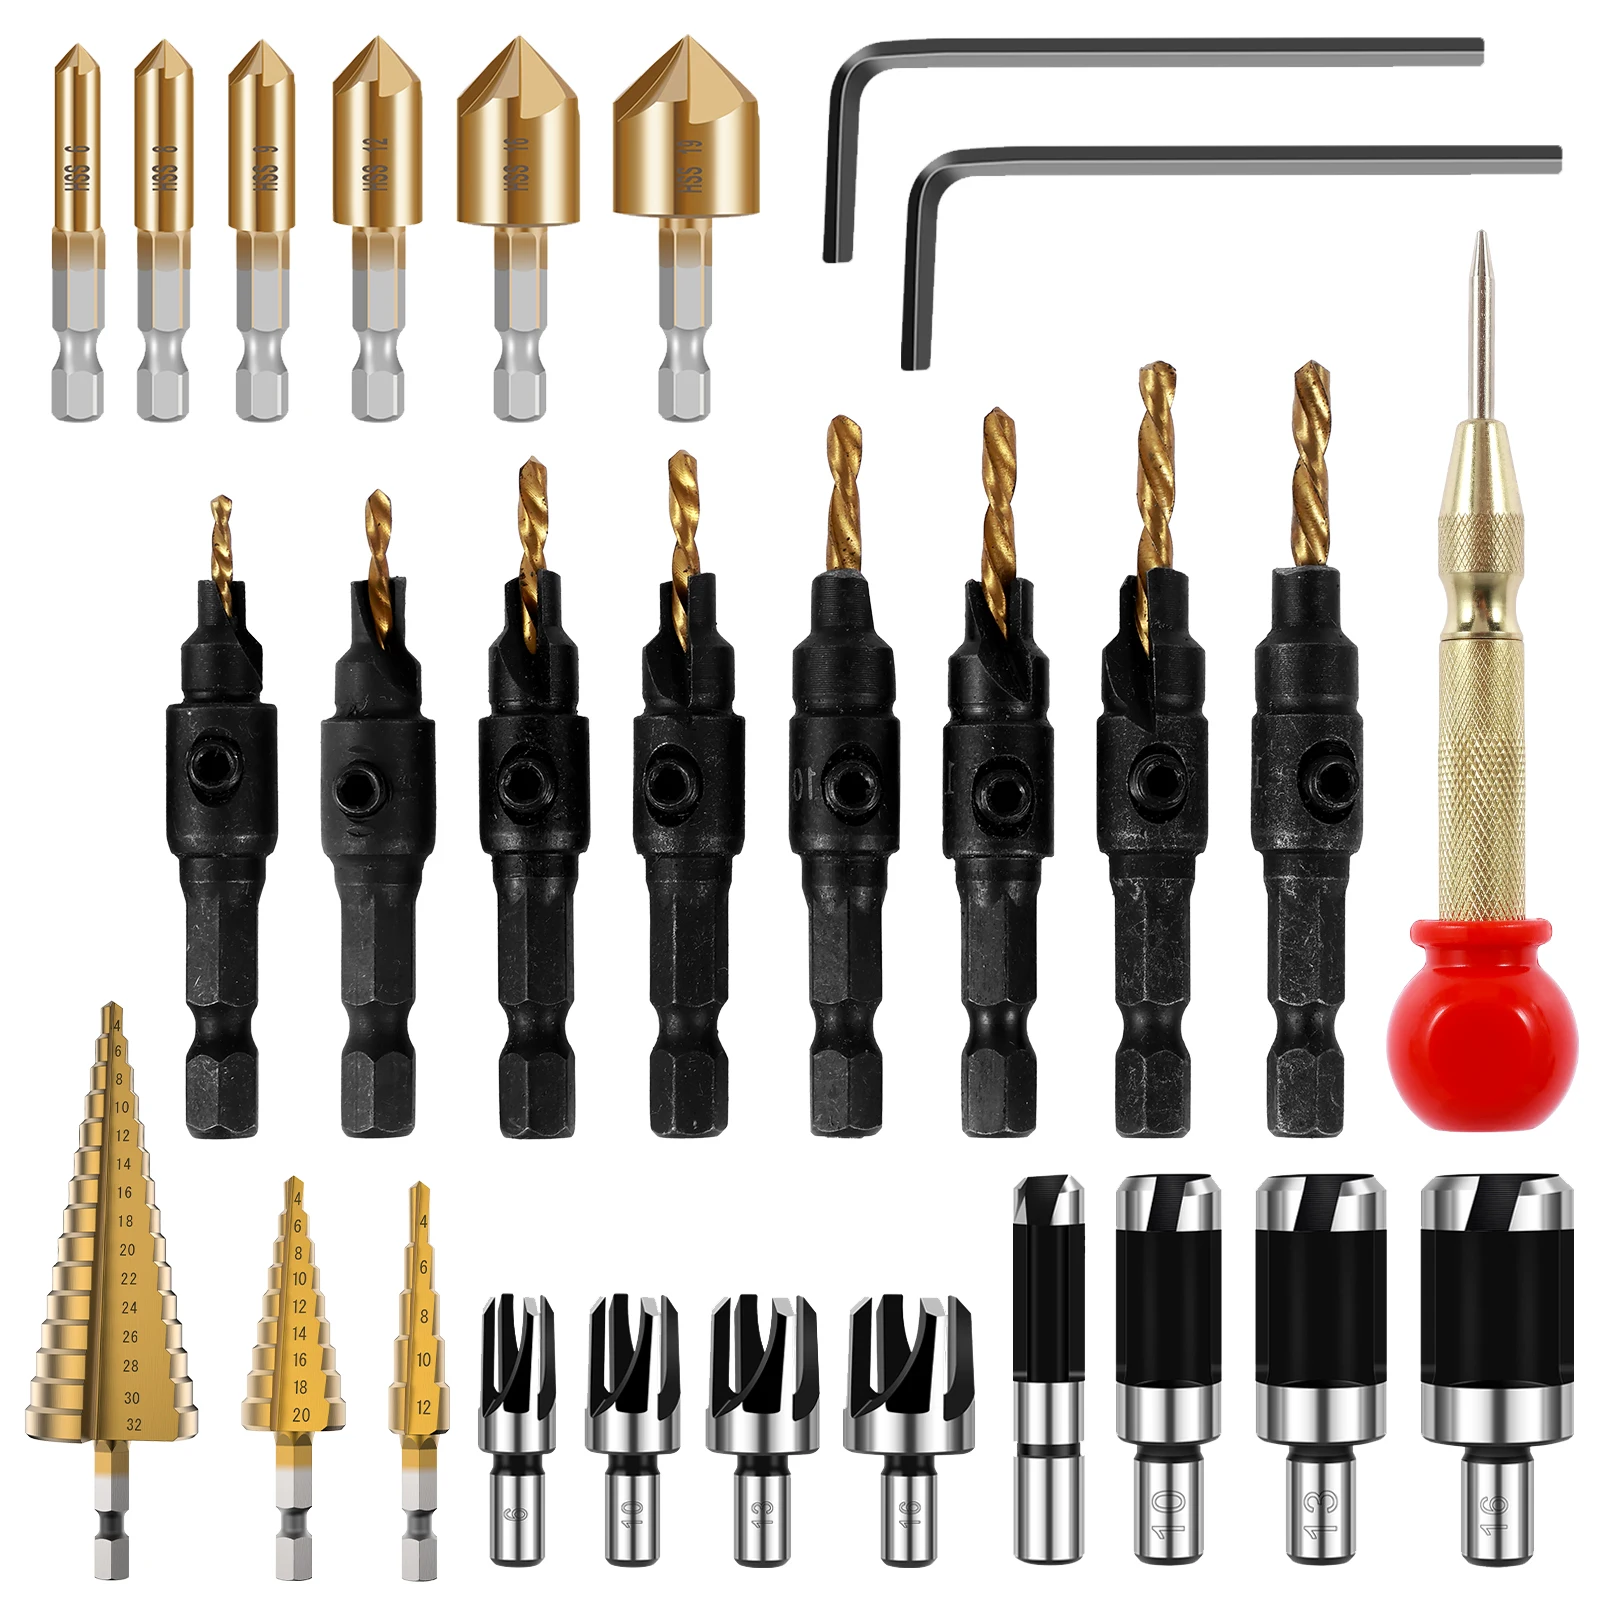 28PCS Woodworking Chamfer Drilling Tool with 8pcs Wood Plug Cutter Drill Bit 3pcs Step Drill Bit Countersink Drill Bit L-Wrench tool wood drill bits for woodworking high carbon steel spiral wood 3mm 3mmx 58mm 8pcs set accessories drill bit